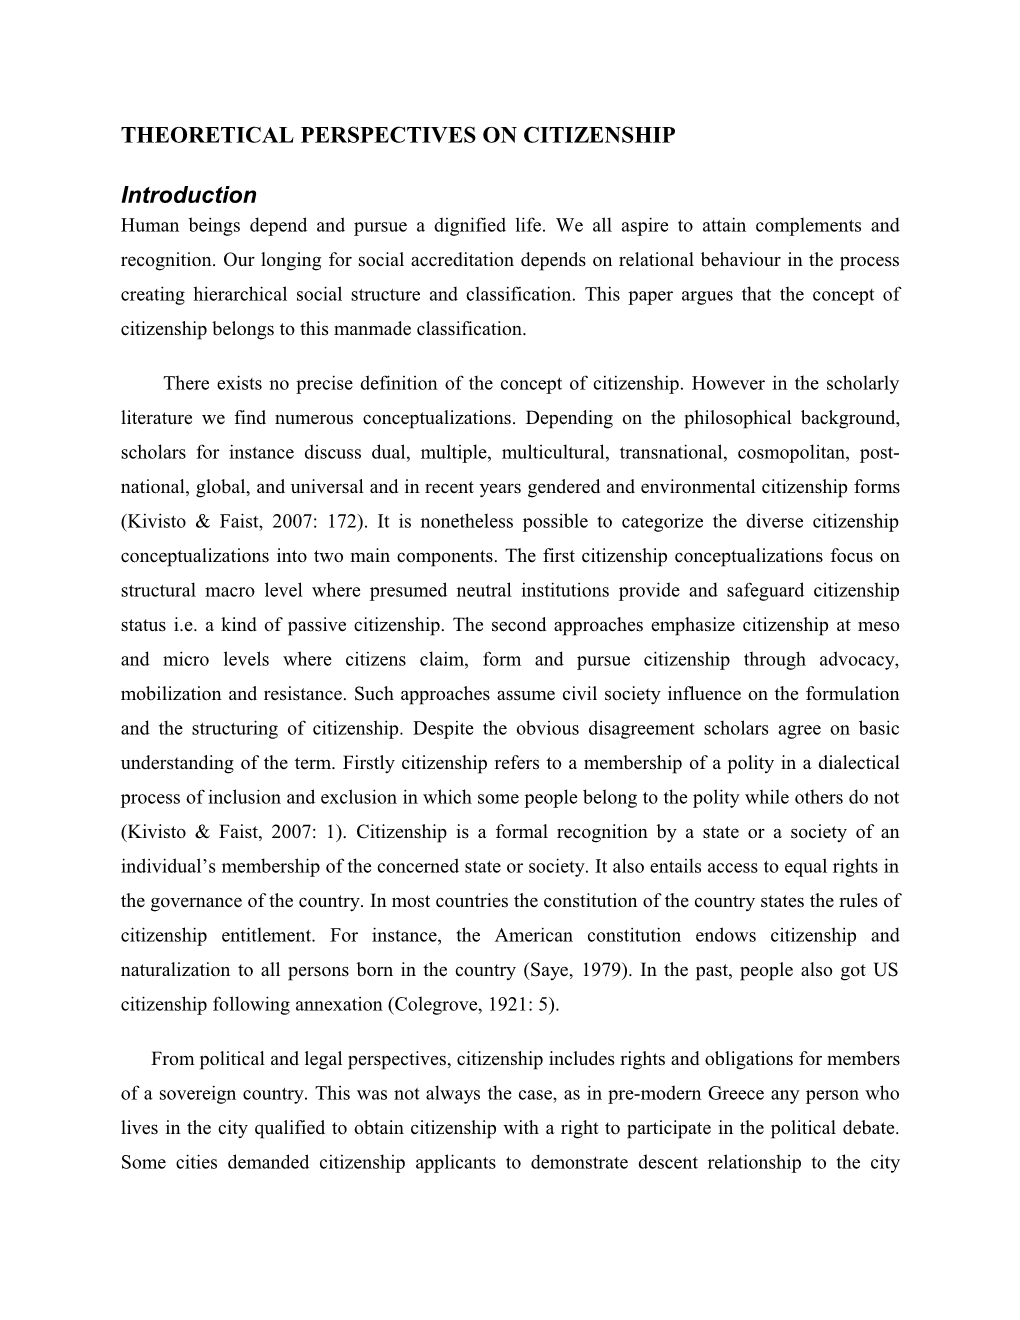 Theoretical Perspectives on Citizenship